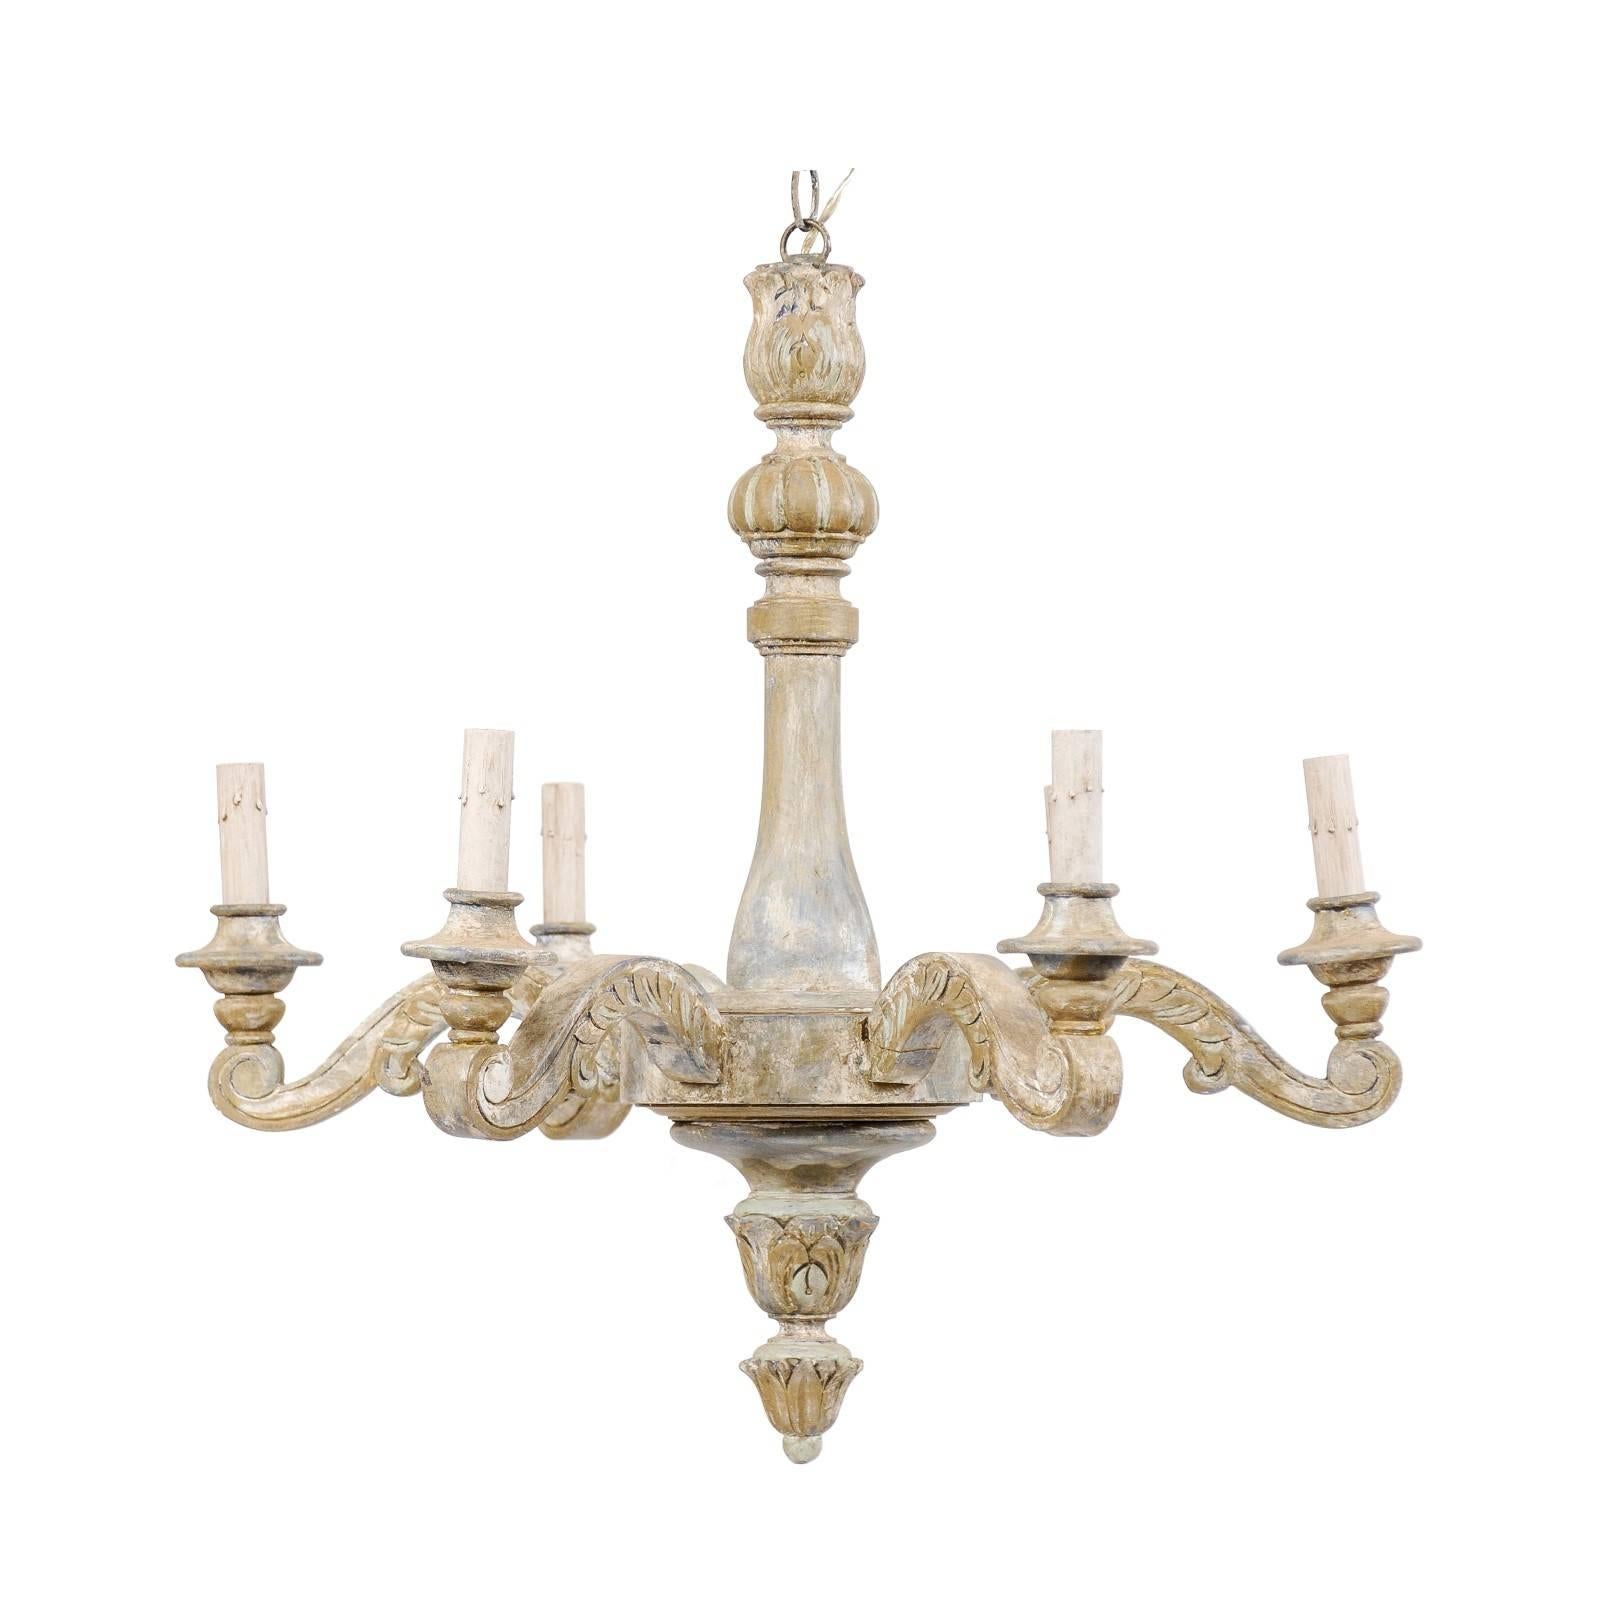 French Vintage Painted and Carved Wood Six-Light Chandelier with Scrolled Arms